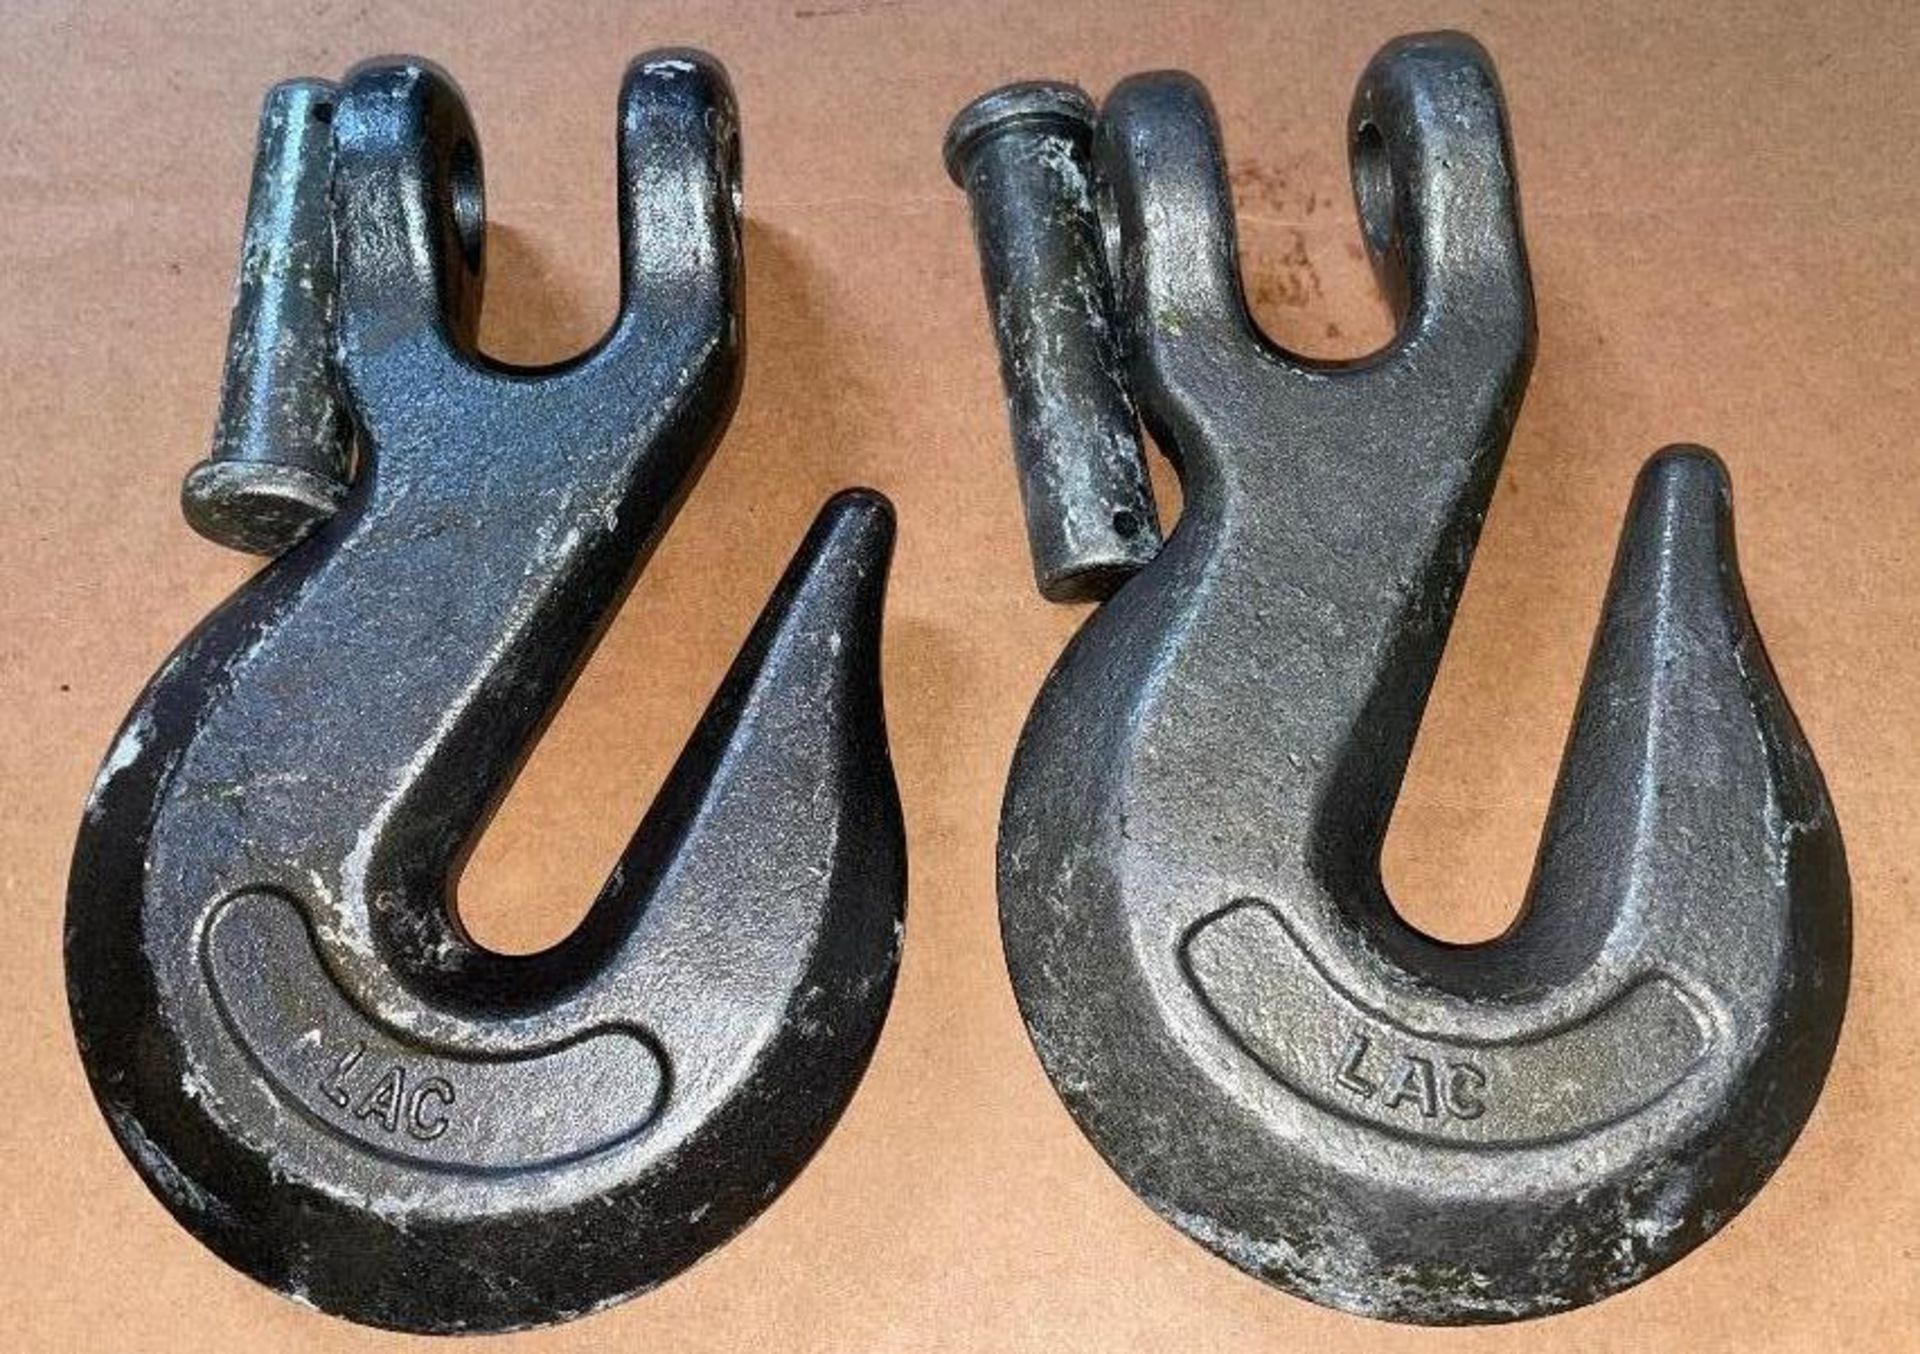 (10) LACLEDE CHAIN FORGED STEEL CLEVIS GRAB HOOKS FOR LOAD BINDINGS BRAND / MODEL: LACLEDE CHAIN ADD